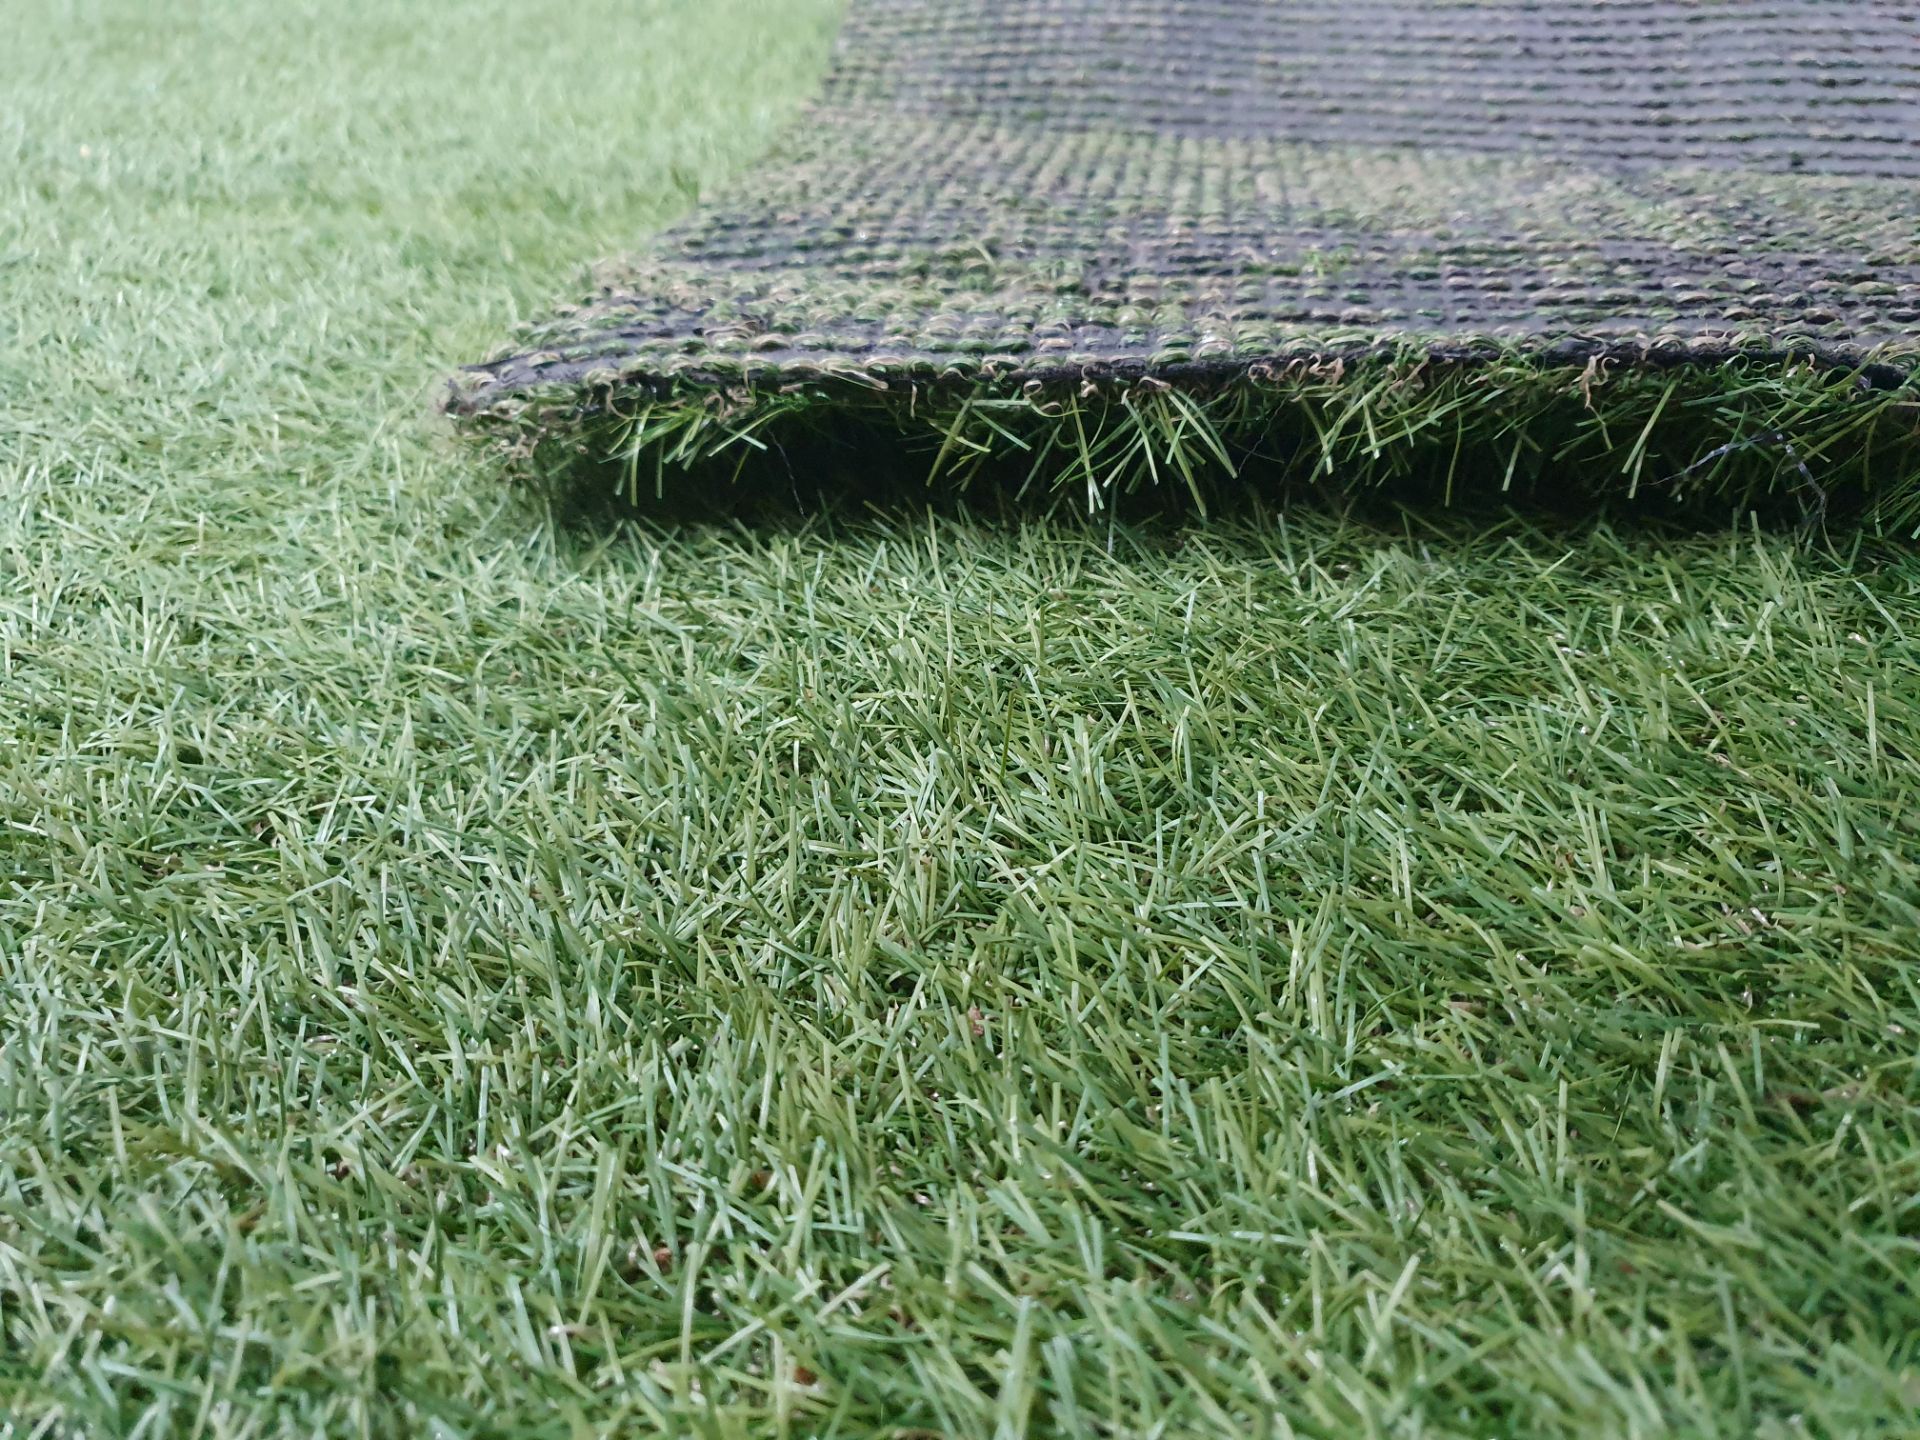 Roll of Green Artificial Grass | Approximate size: 3.5m x 4m - Image 5 of 6